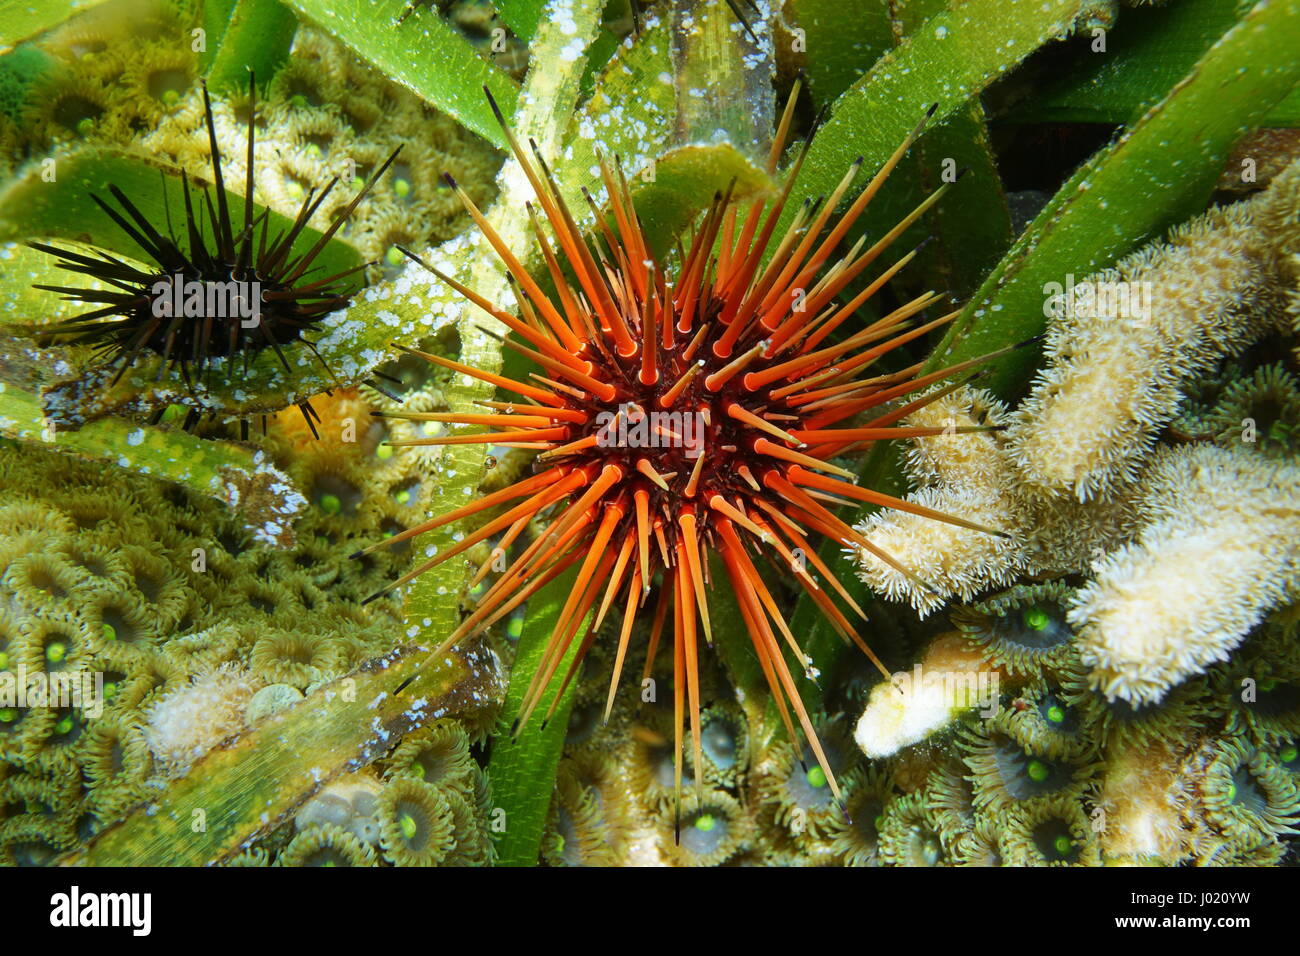 Sea urchin Echinometra viridis underwater on a shallow seabed, commonly called reef urchin, Caribbean sea Stock Photo